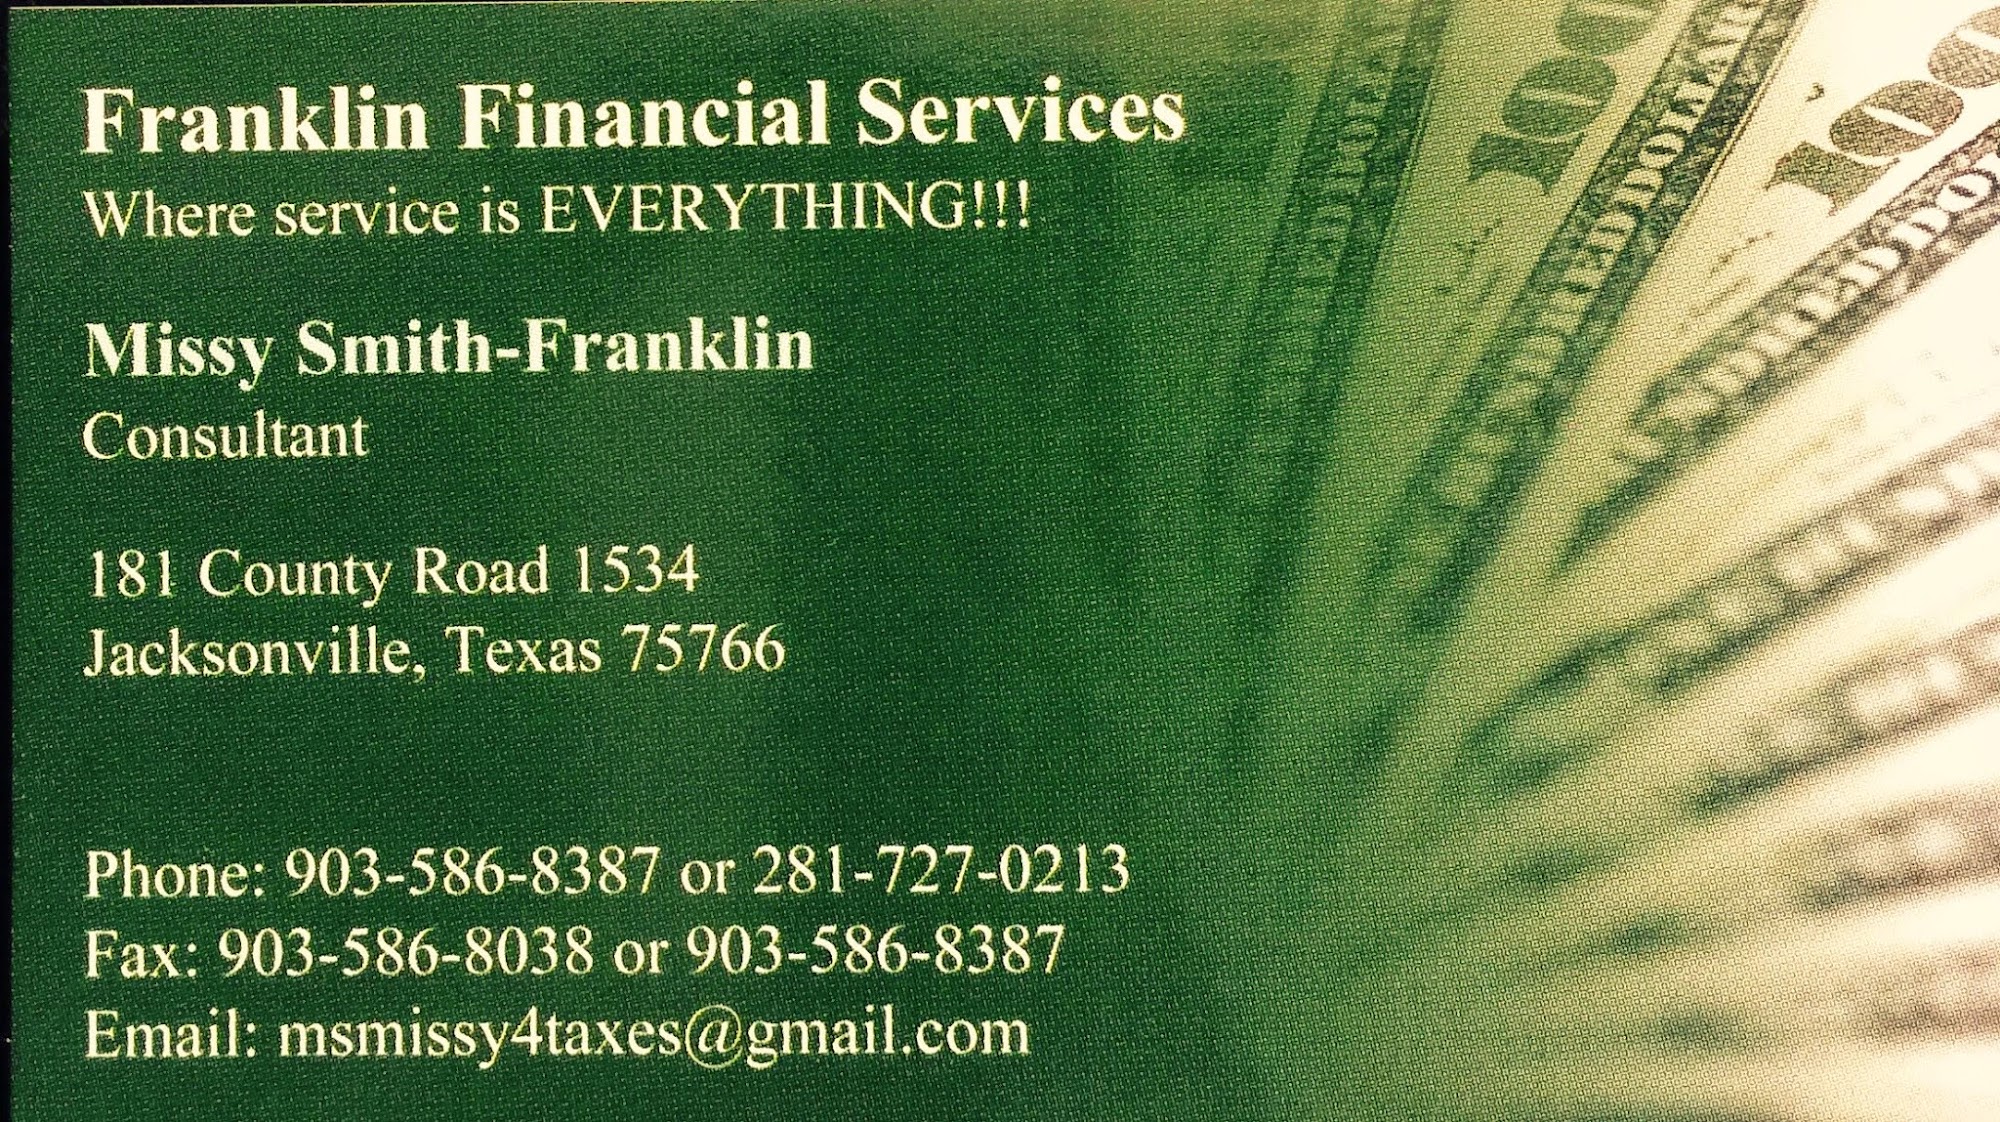 Missy's Tax Service And Franklin Financial Services 181 County Rd 1534, Jacksonville Texas 75766